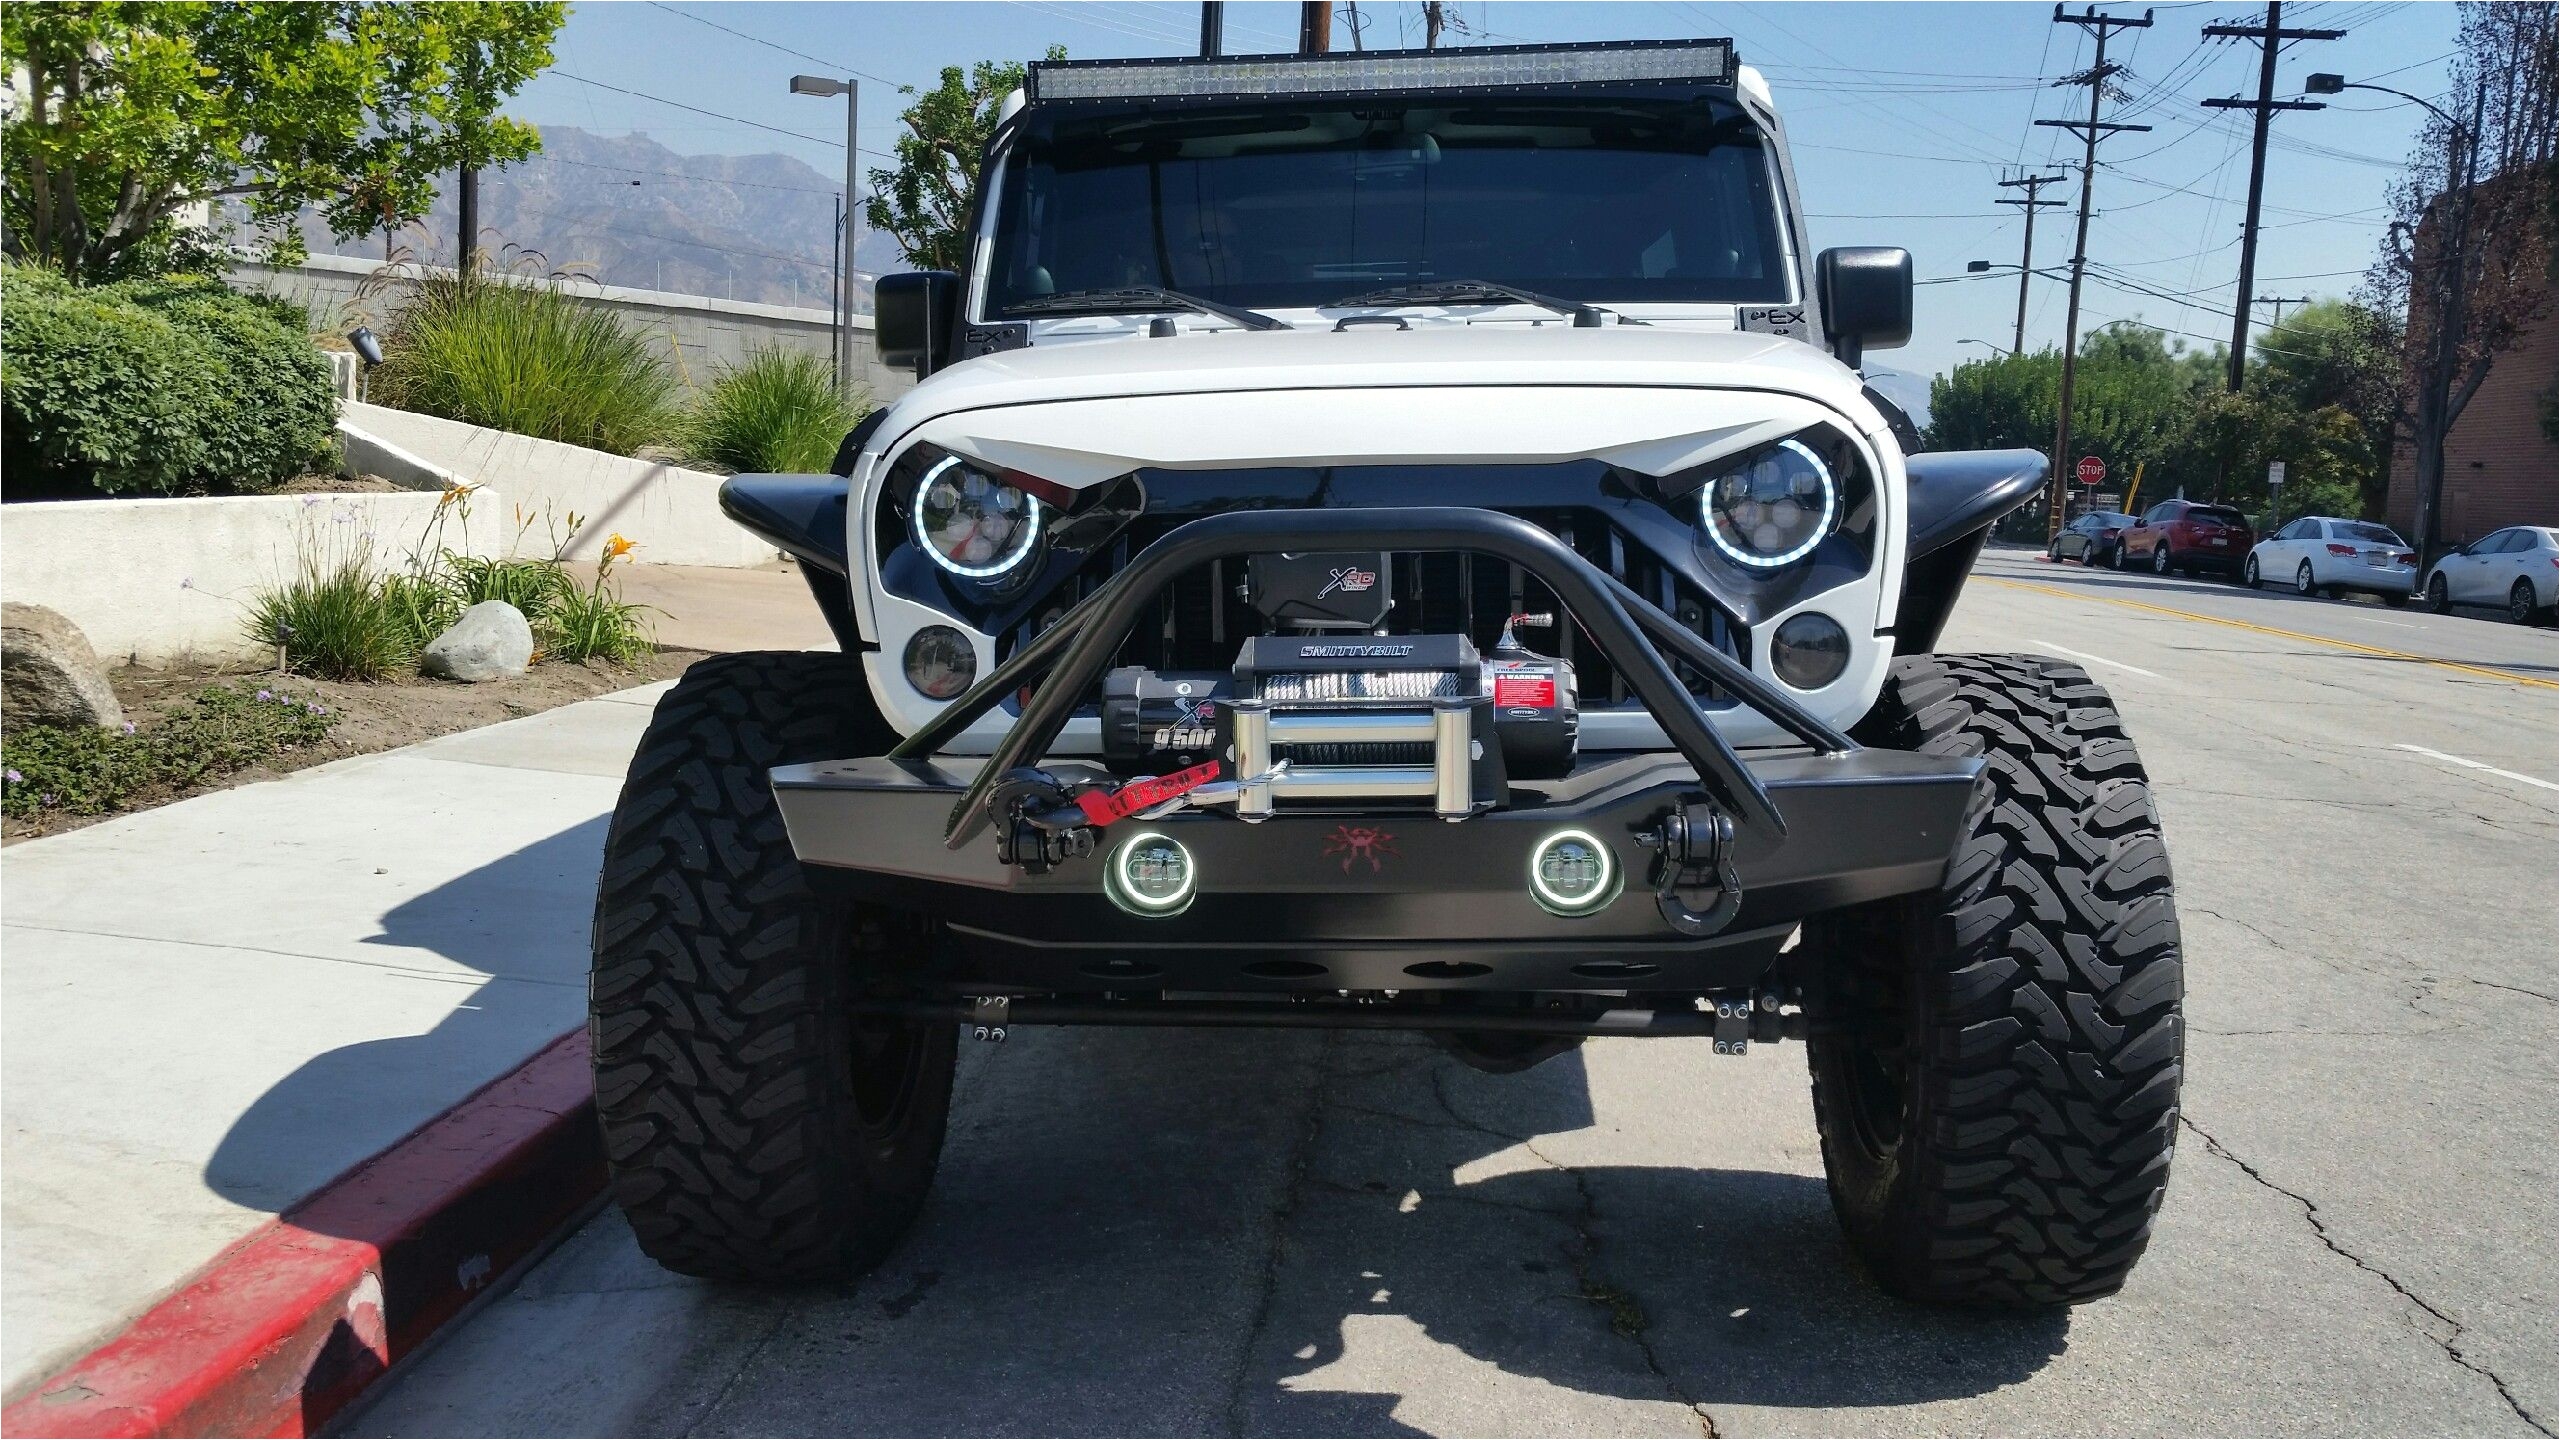 mean looking jeep jk with halo headlights poison spyder bumper new grille winch and a light bar